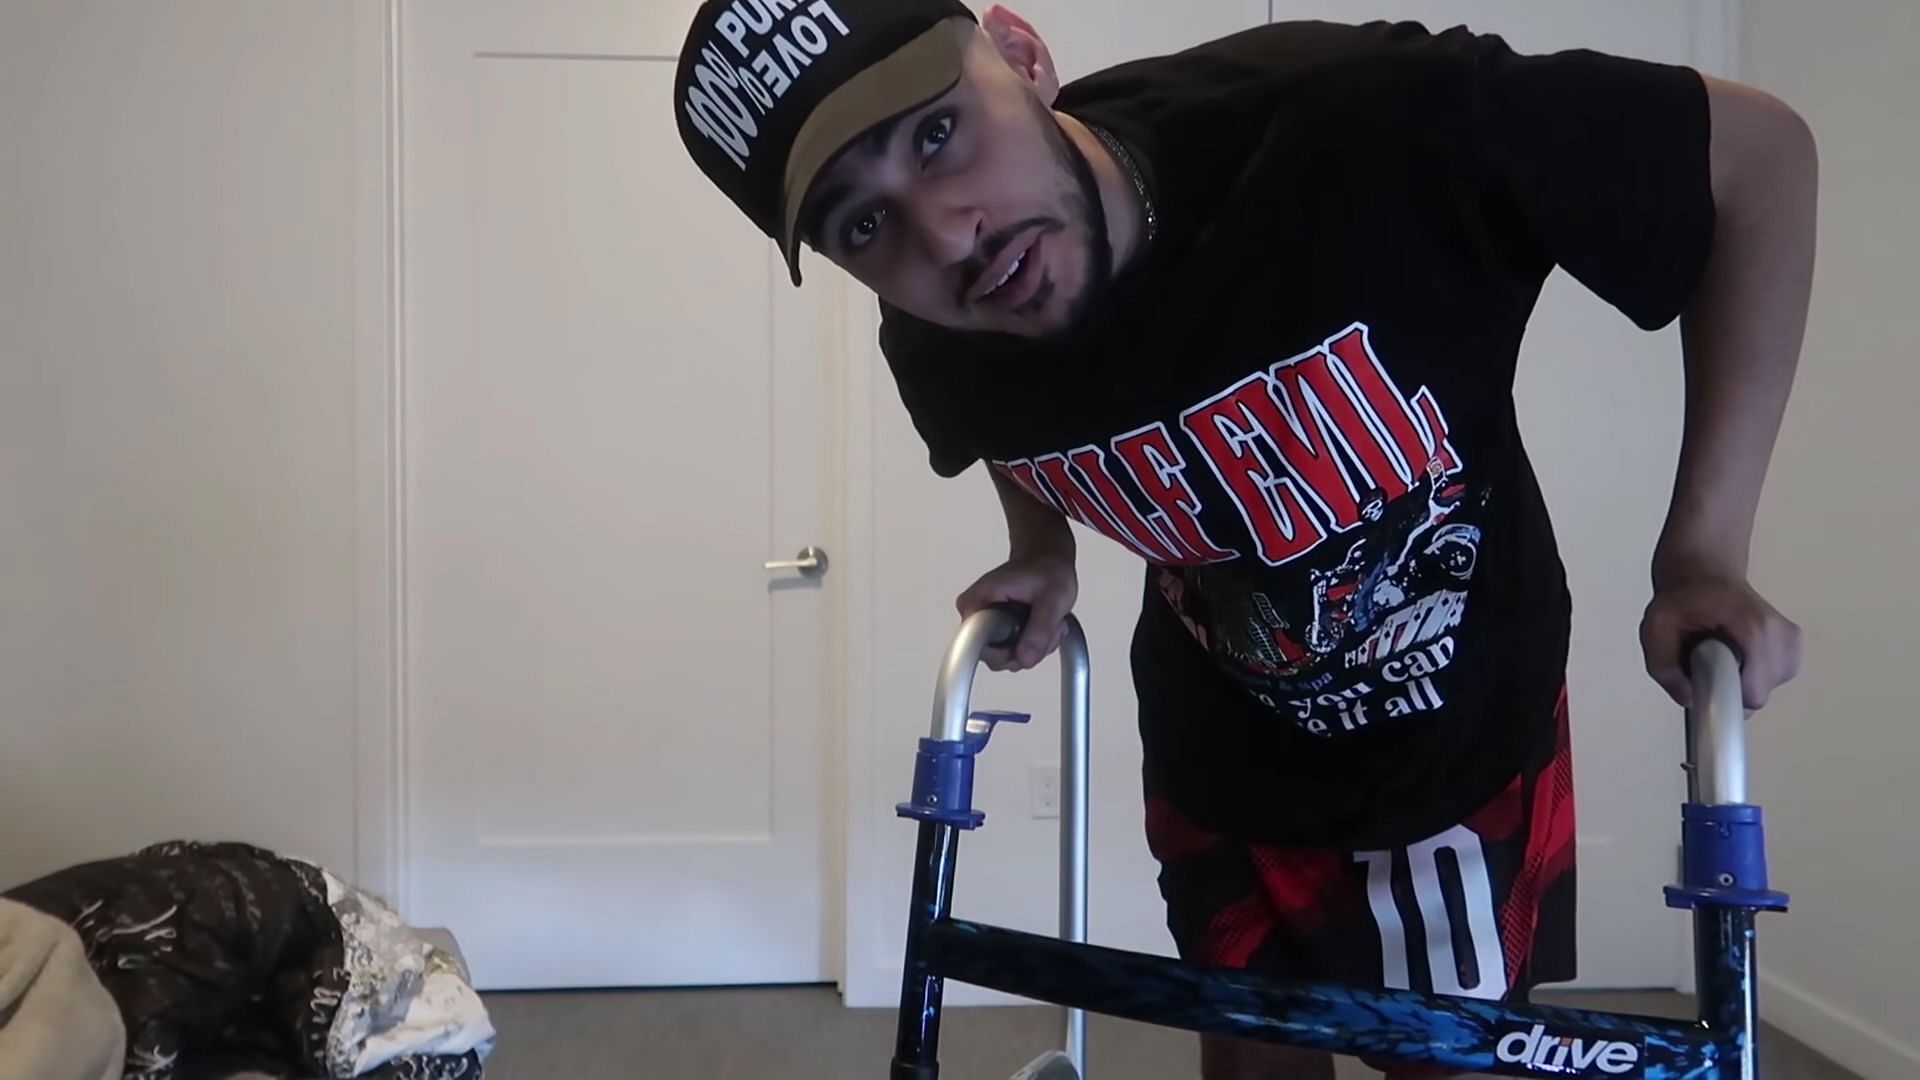 Rain could not walk unassisted for two years (image via YouTuve/@FaZe Rain)